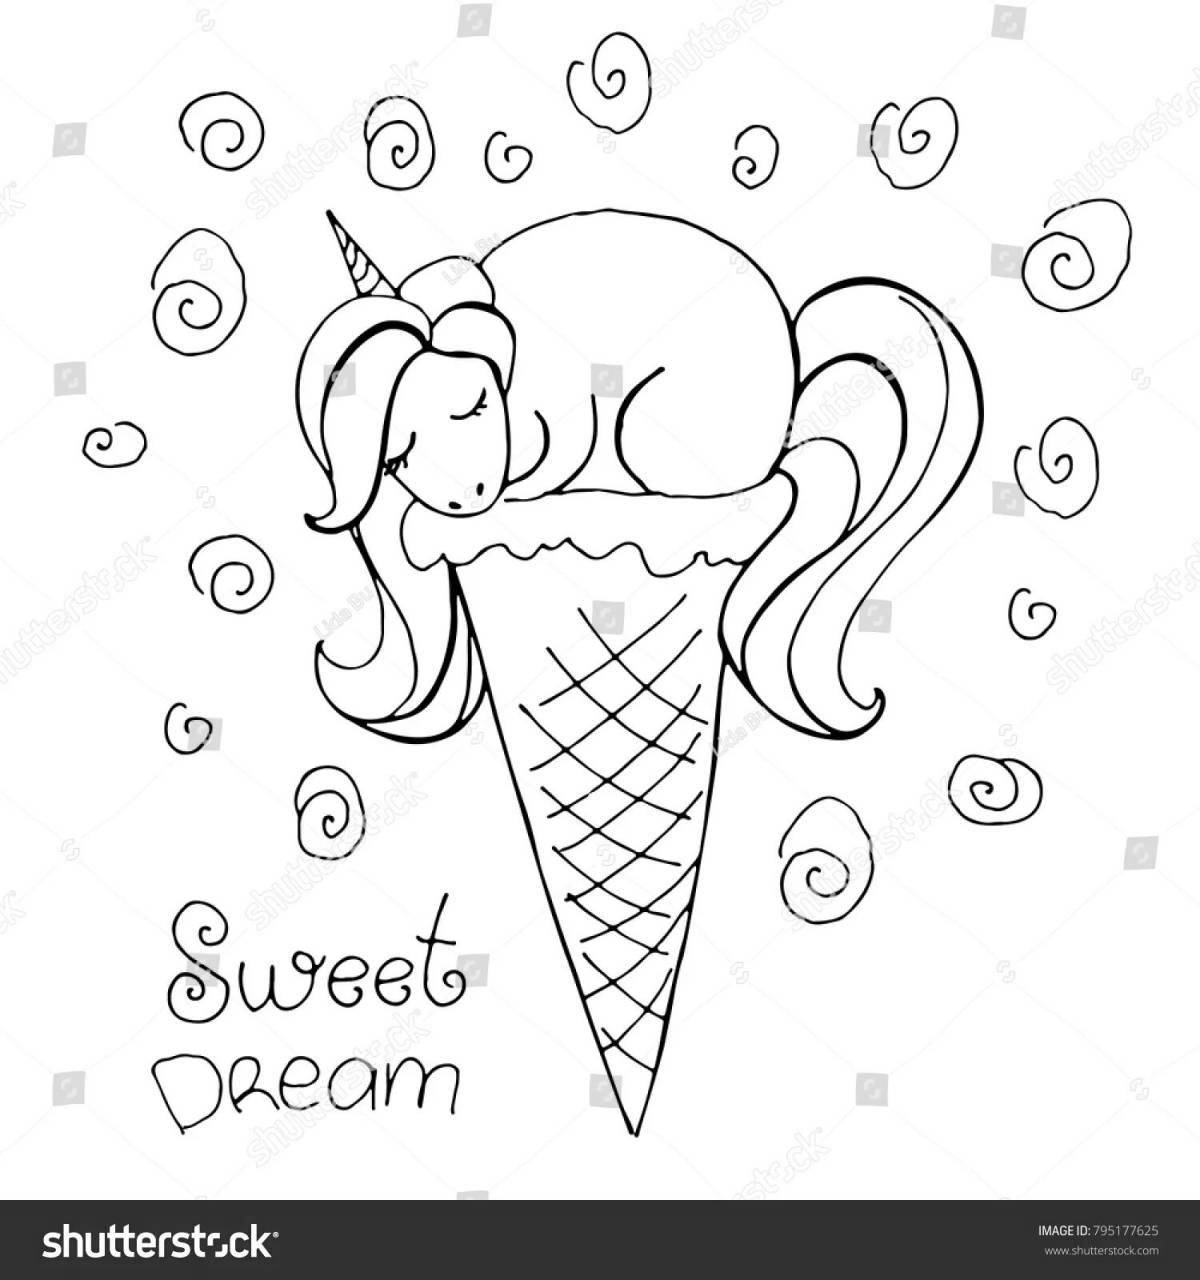 Coloring page holiday penguin with ice cream